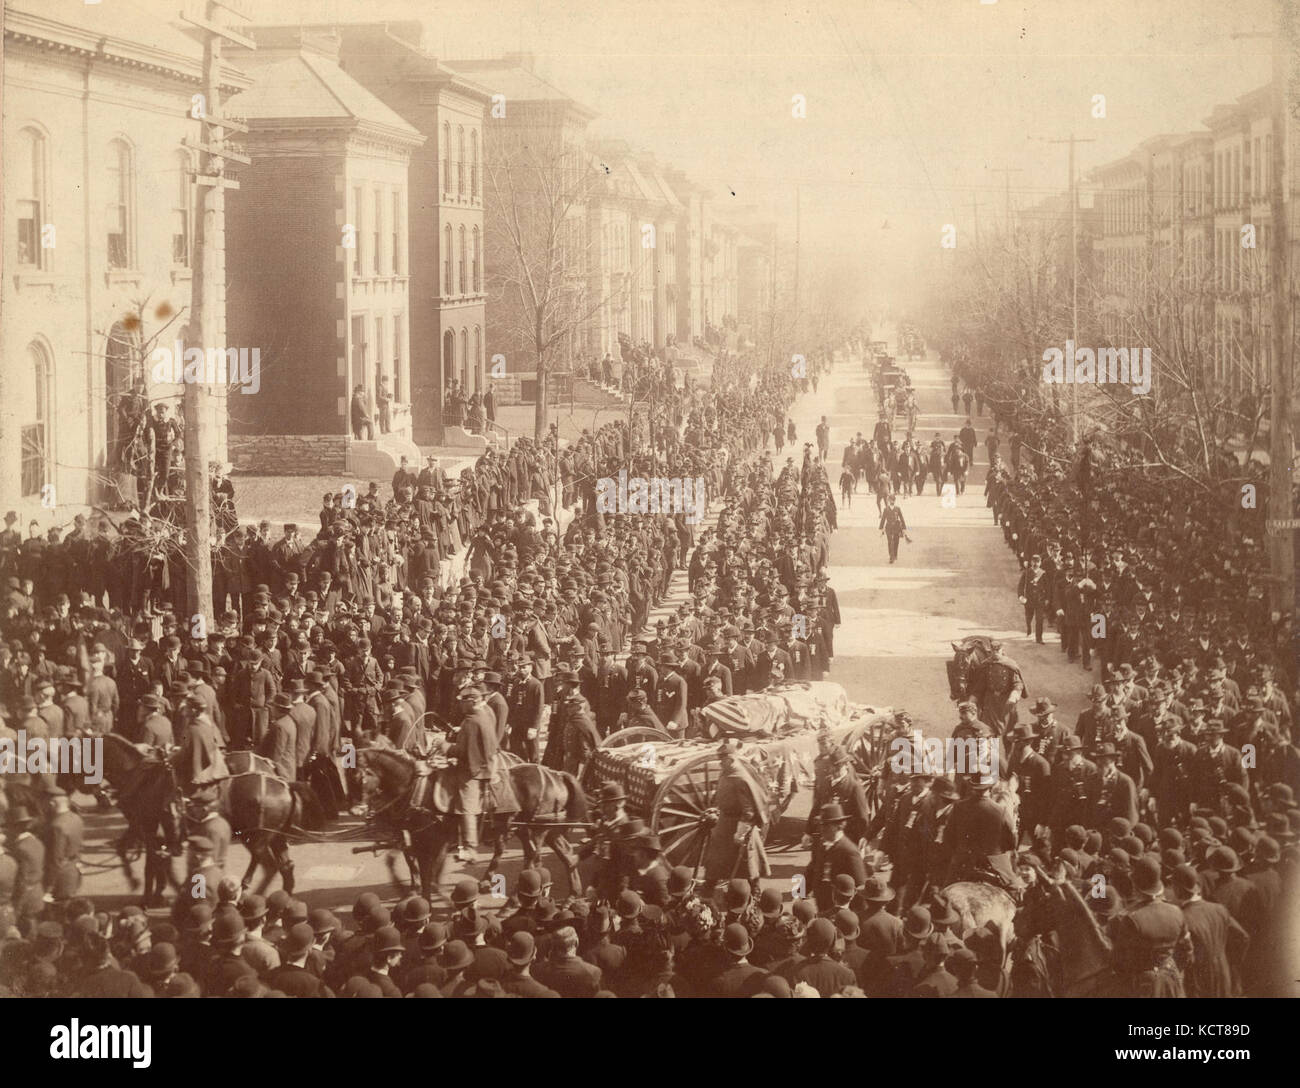 Funeral procession of General William T. Sherman, turning from Pine Street onto Grand Avenue, St. Louis, Missouri. 21 February 1891 Stock Photo